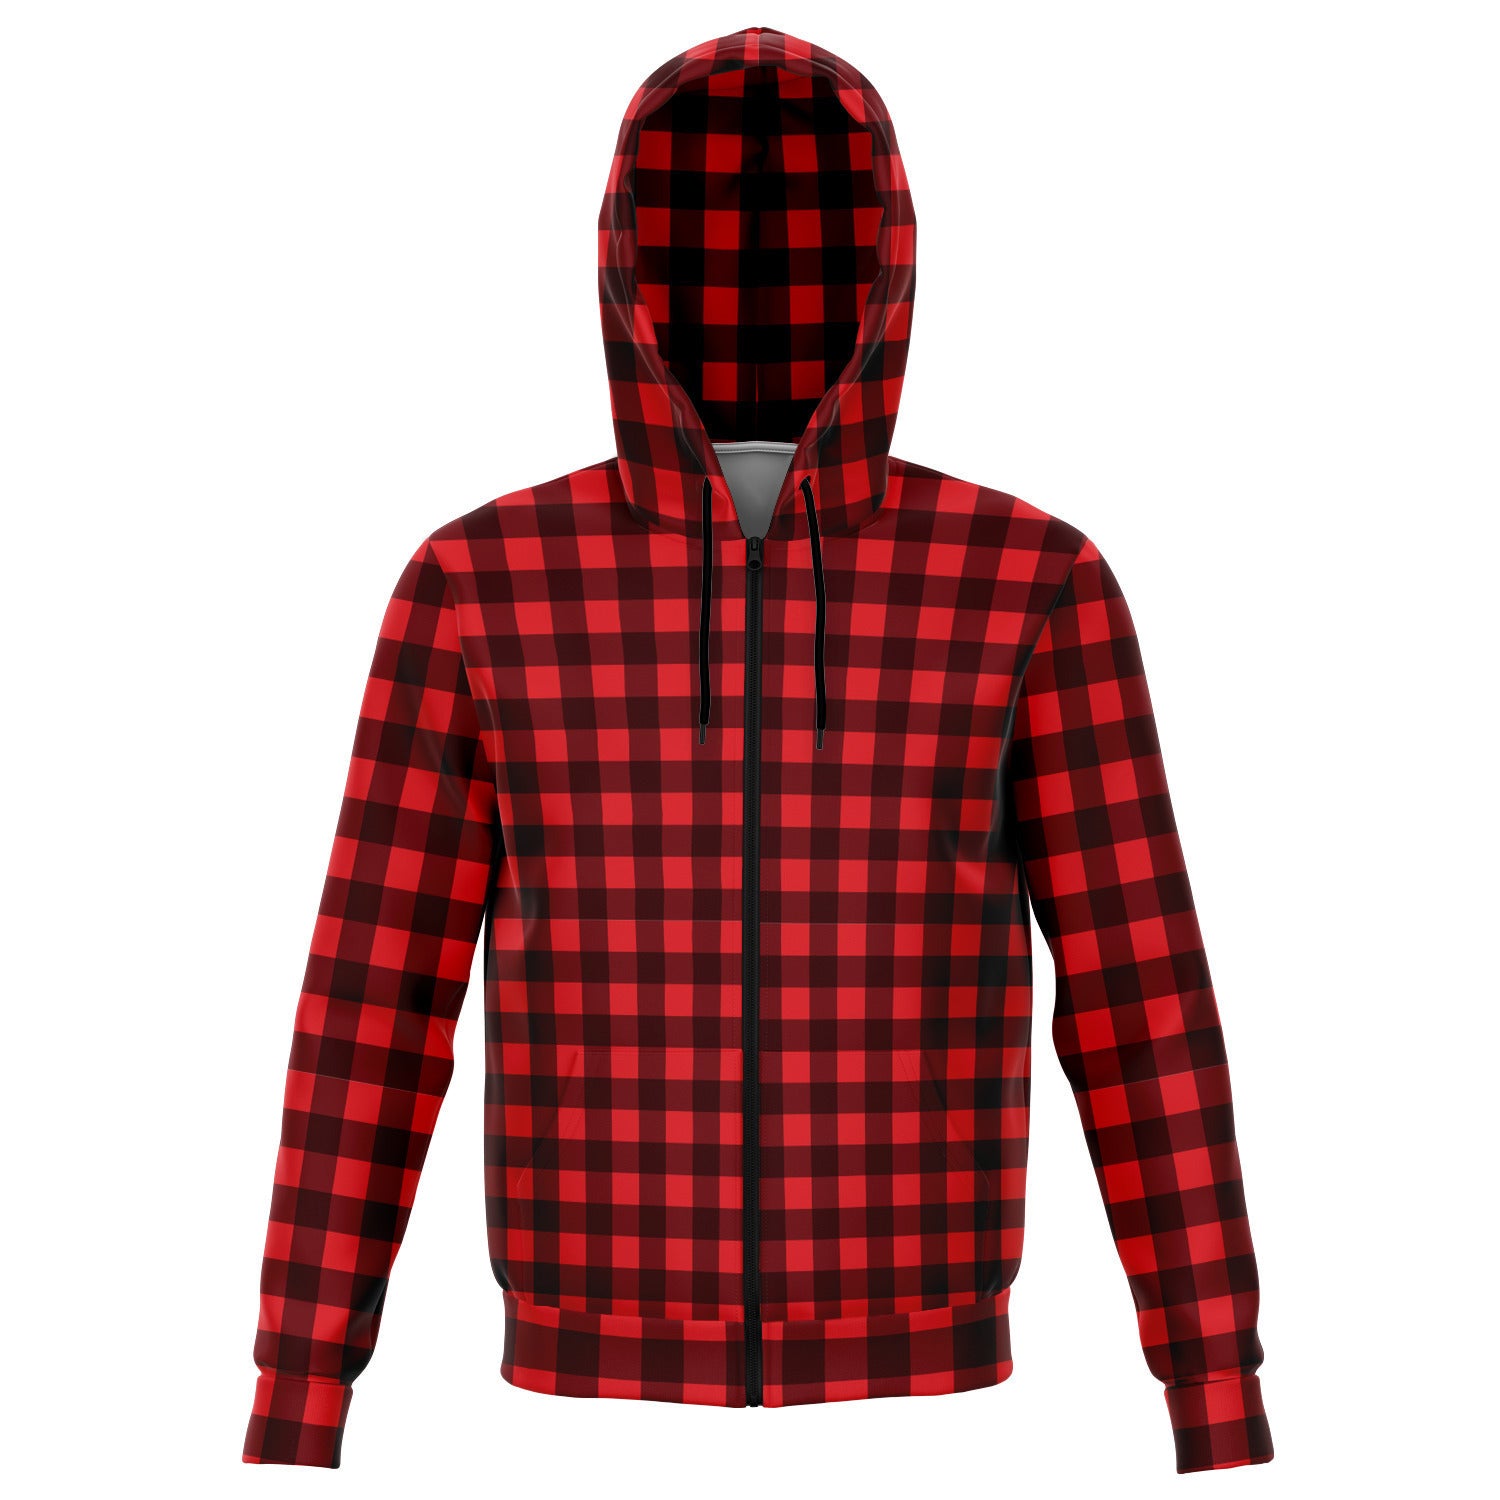 Buffalo Plaid Zip Up Hoodie, Red Black Checkered Front Zip Pocket Men Women Adult Aesthetic Graphic Cotton Hooded Sweatshirt Starcove Fashion